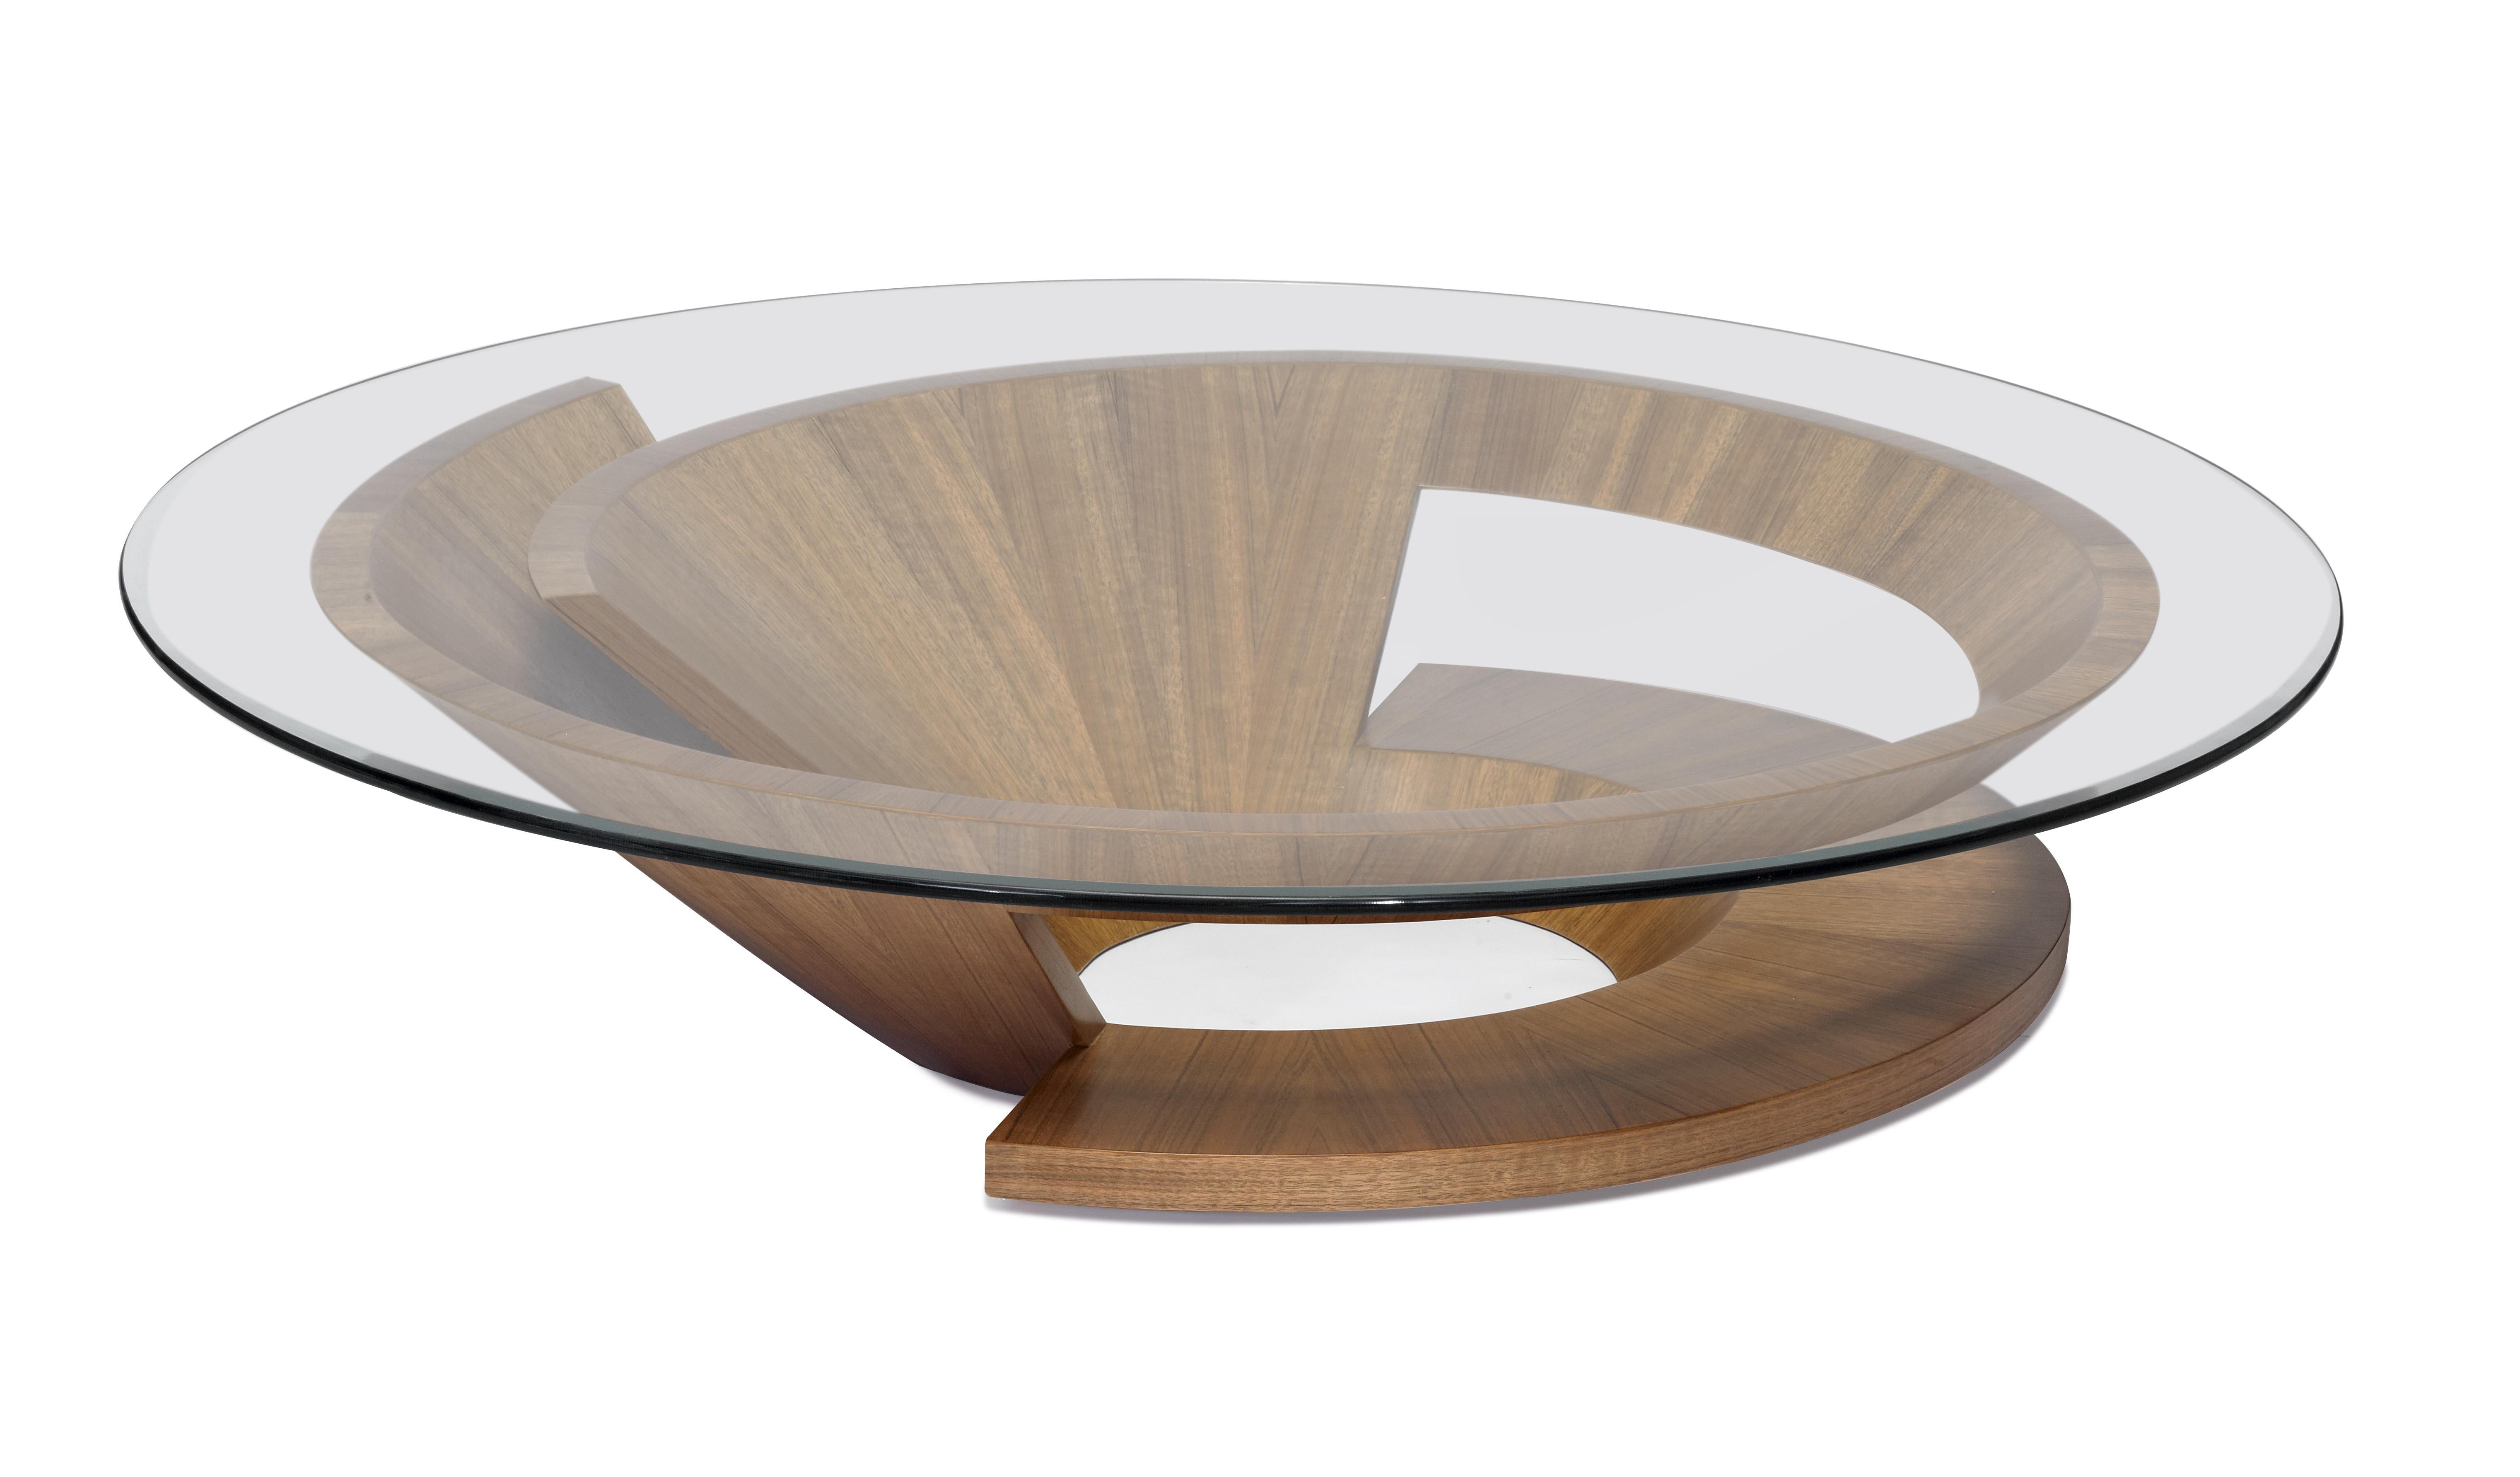 Maurice Barilone's design showcases a high-fashion look with concentric lines of Dao, elegantly crowned with a round glass top. The meticulous arrangement of concentric lines in Dao wood creates a visually captivating shapes that exudes